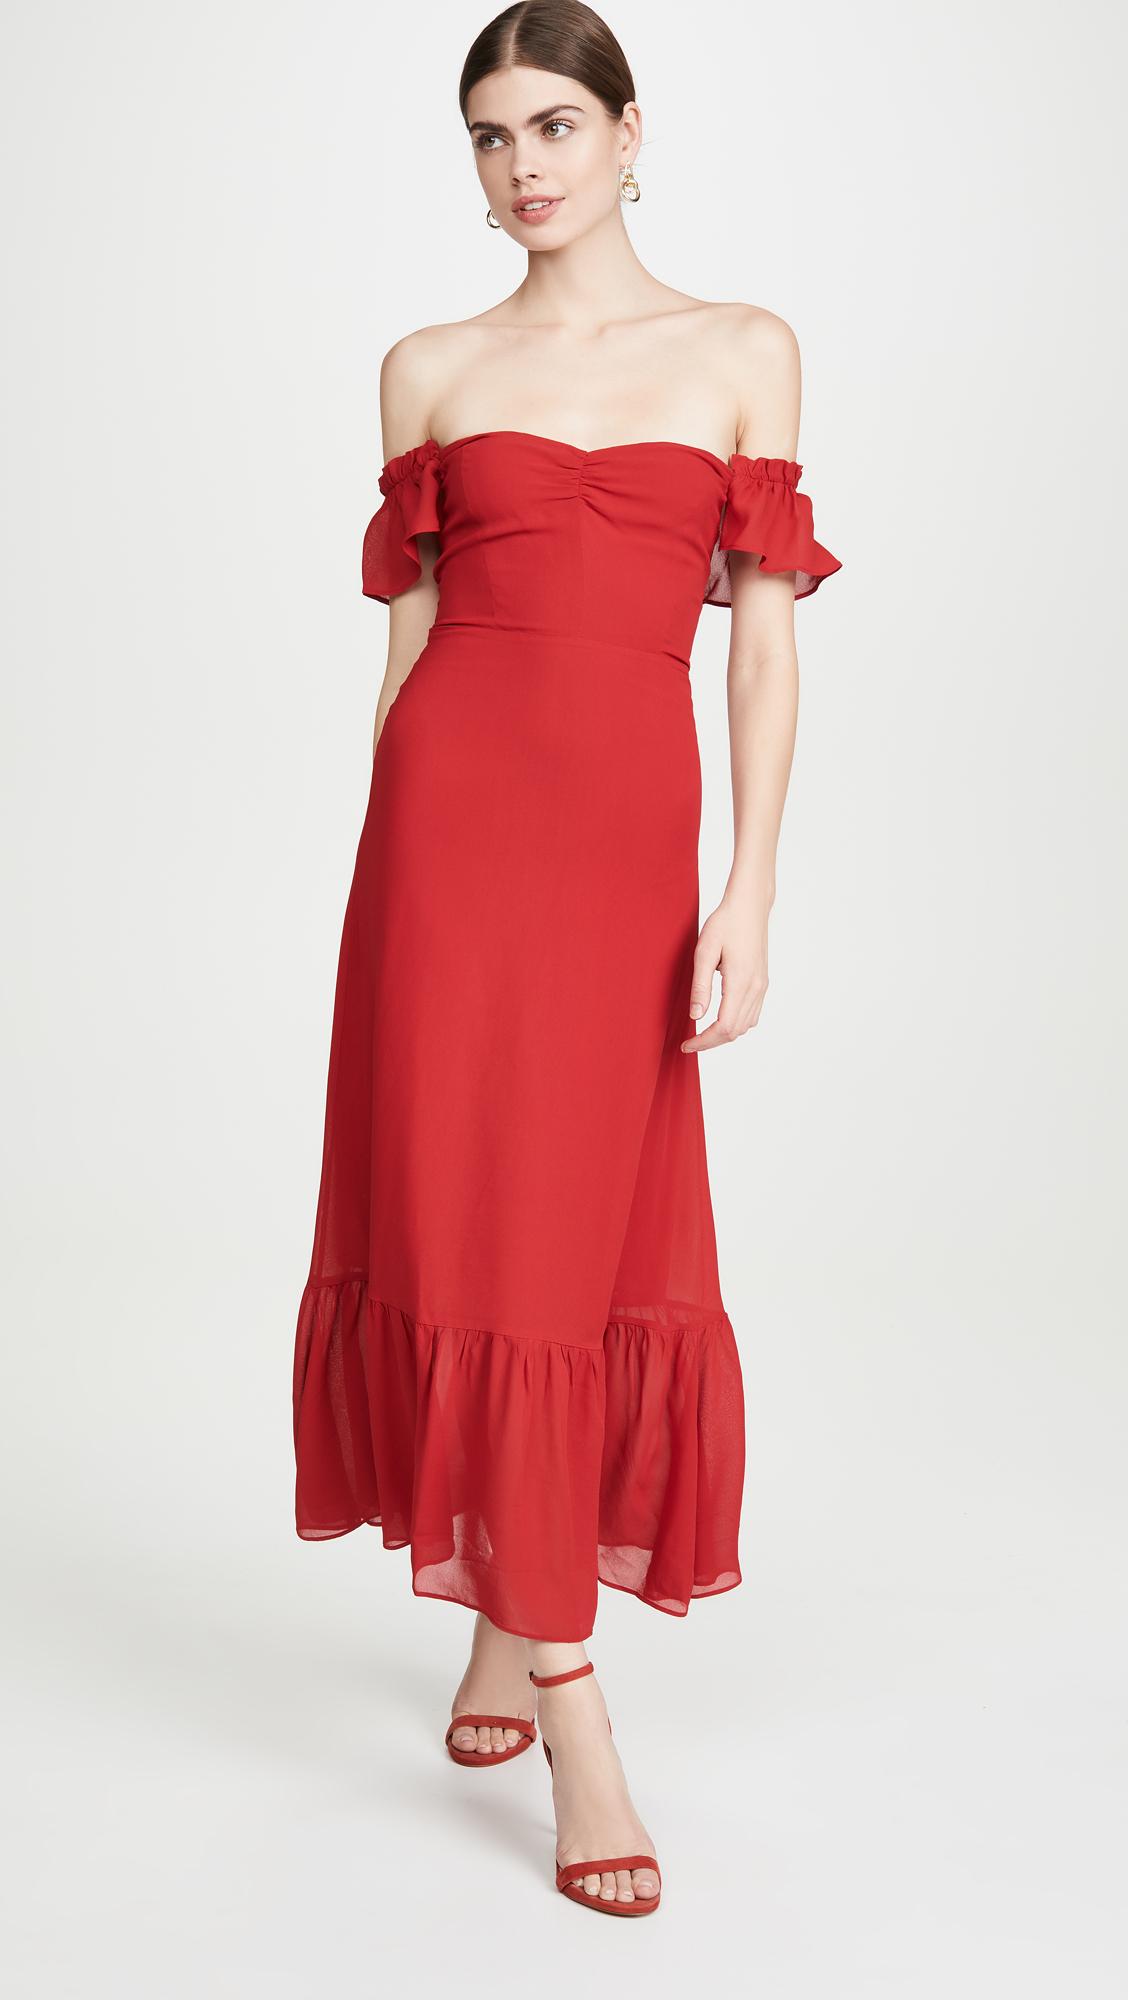 Reformation Synthetic Butterfly Dress in Cherry (Red) - Lyst